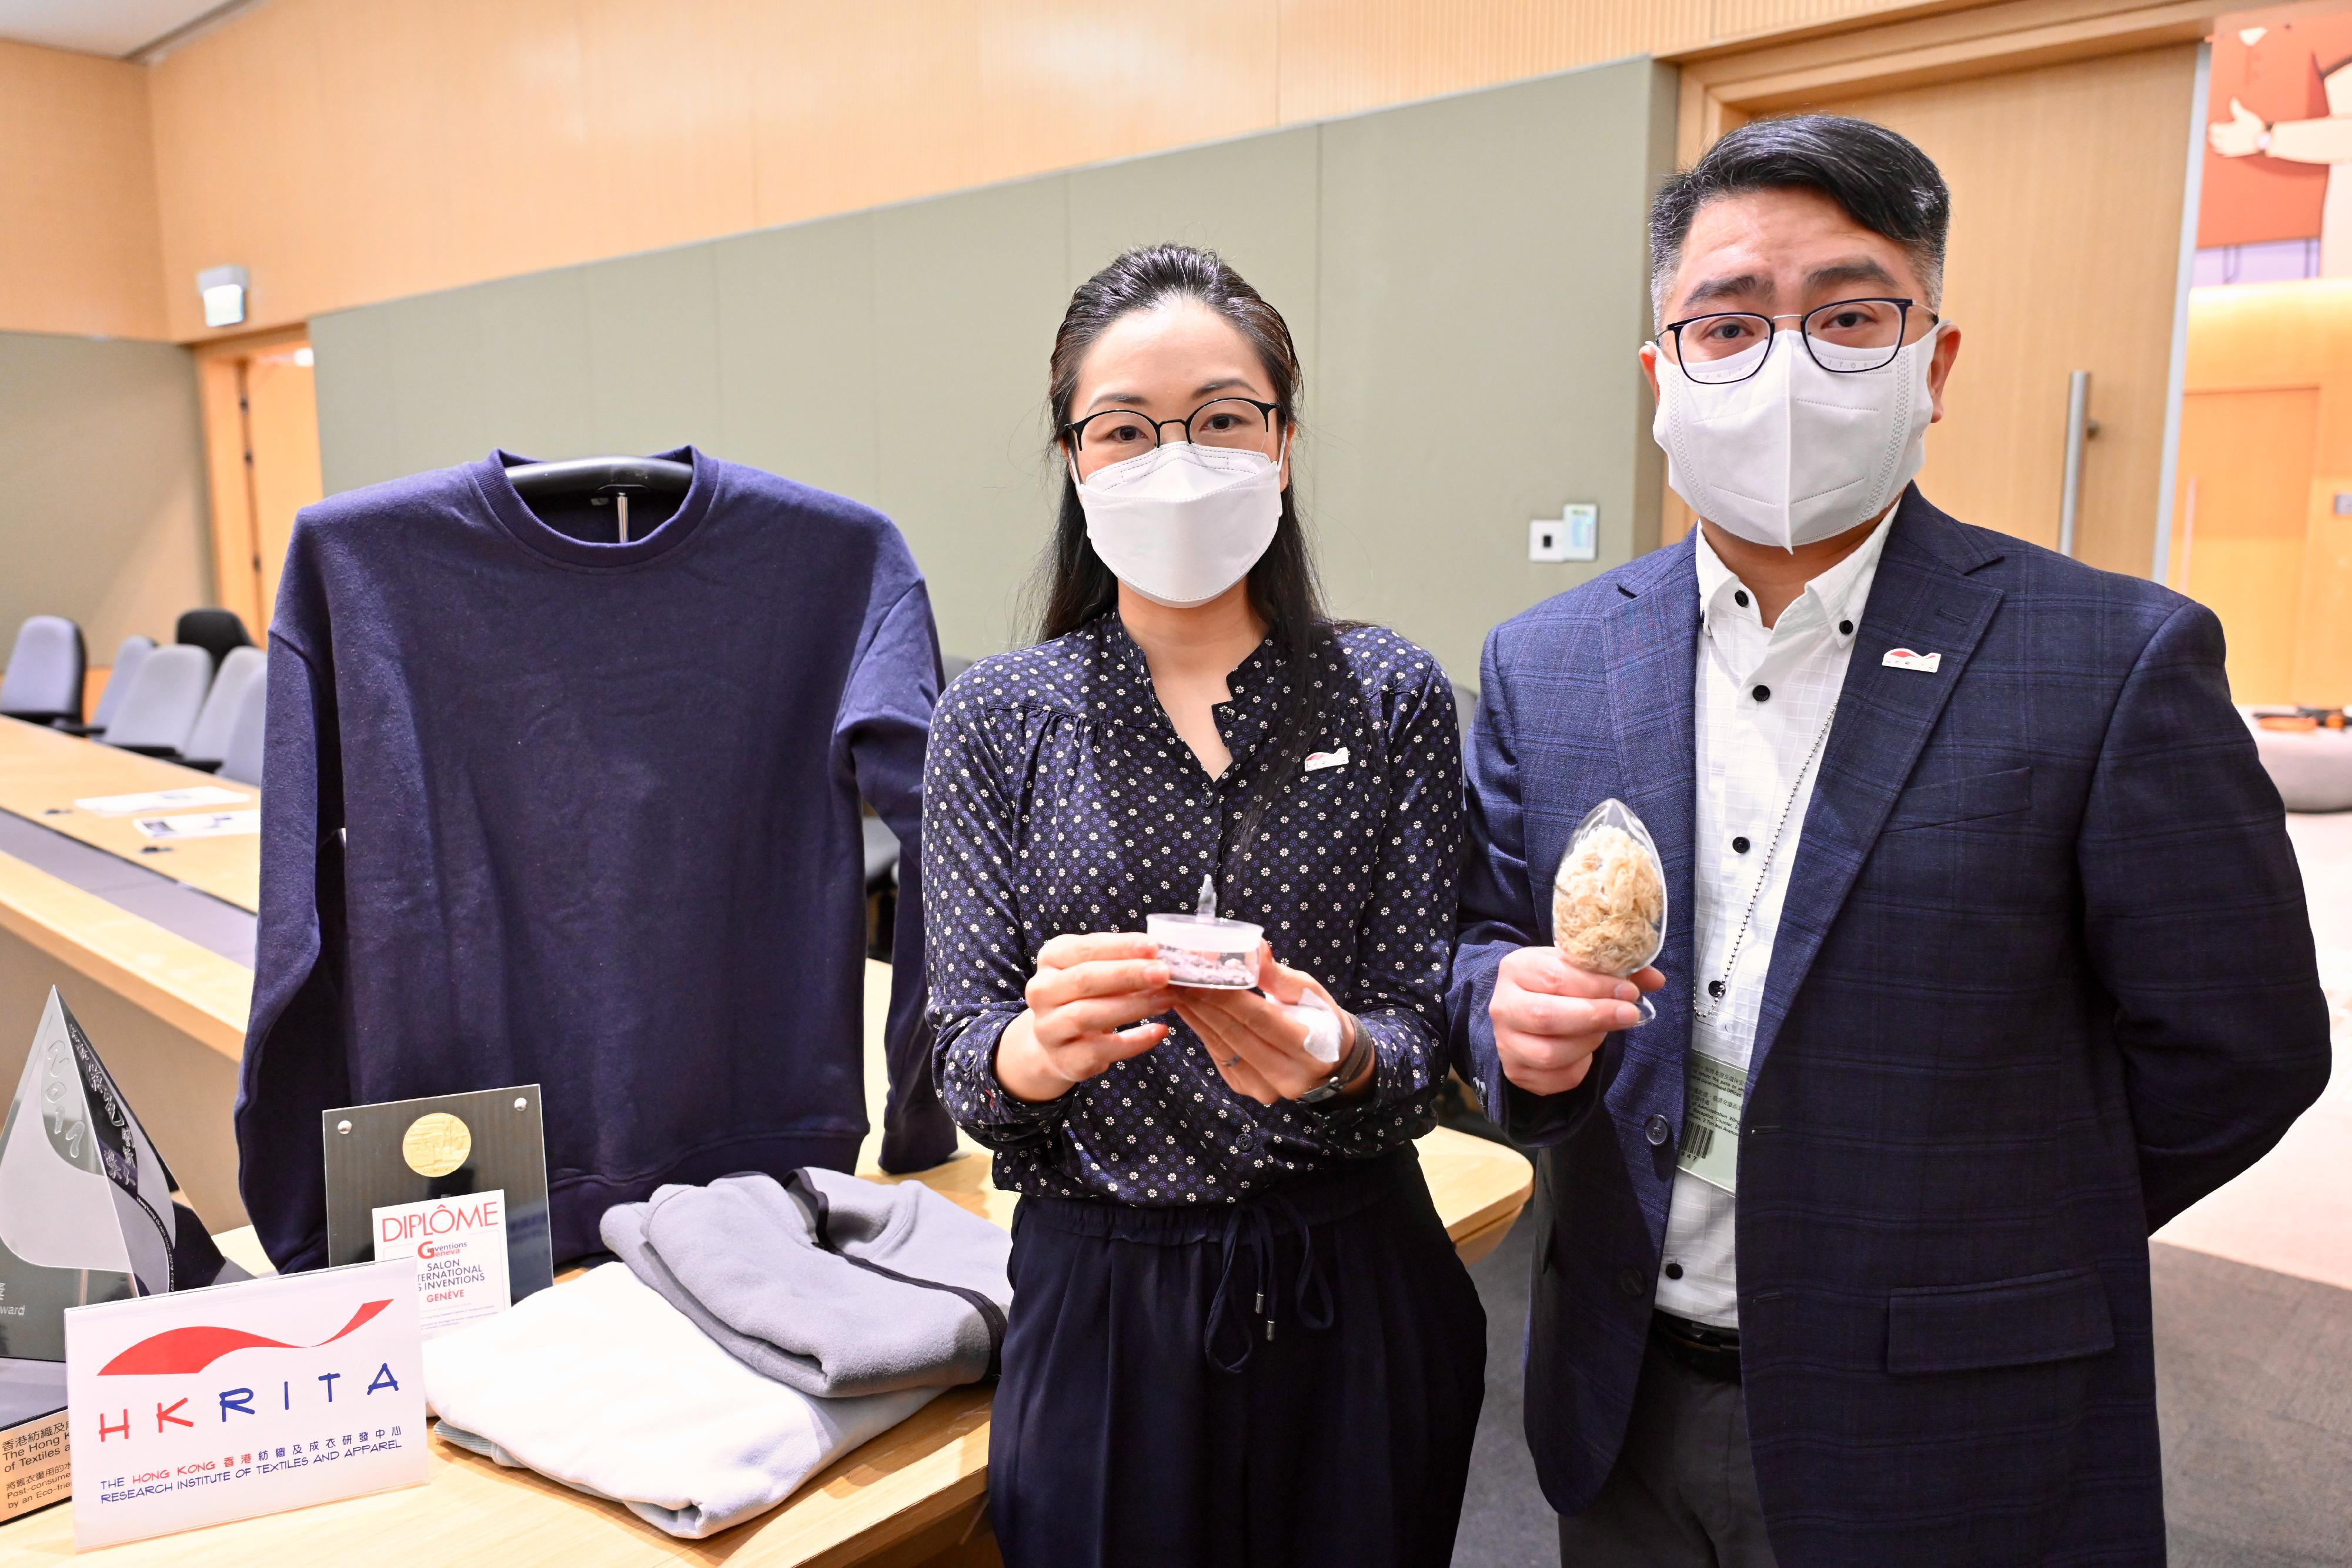 InnoCarnival 2022 will run from October 22 to 30. Picture shows the research and development project developed by the Hong Kong Research Institute of Textiles and Apparel, Green Machine, which provides a hydrothermal solution to separate and recycle cotton-polyester blended textiles.